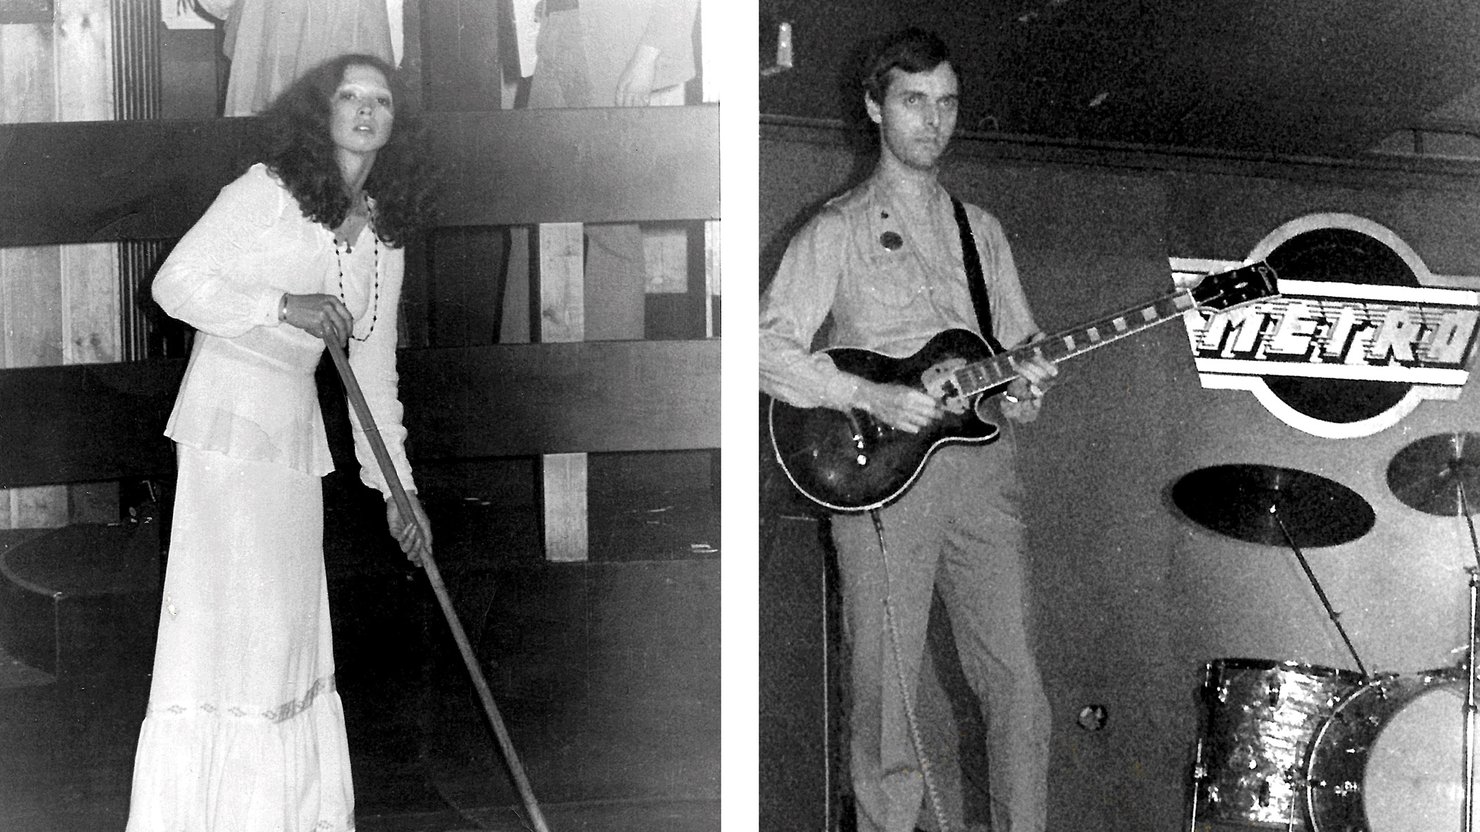 Michele after a gig at The Van Dike Club, c1971, and Greg on stage at Metro, c1978